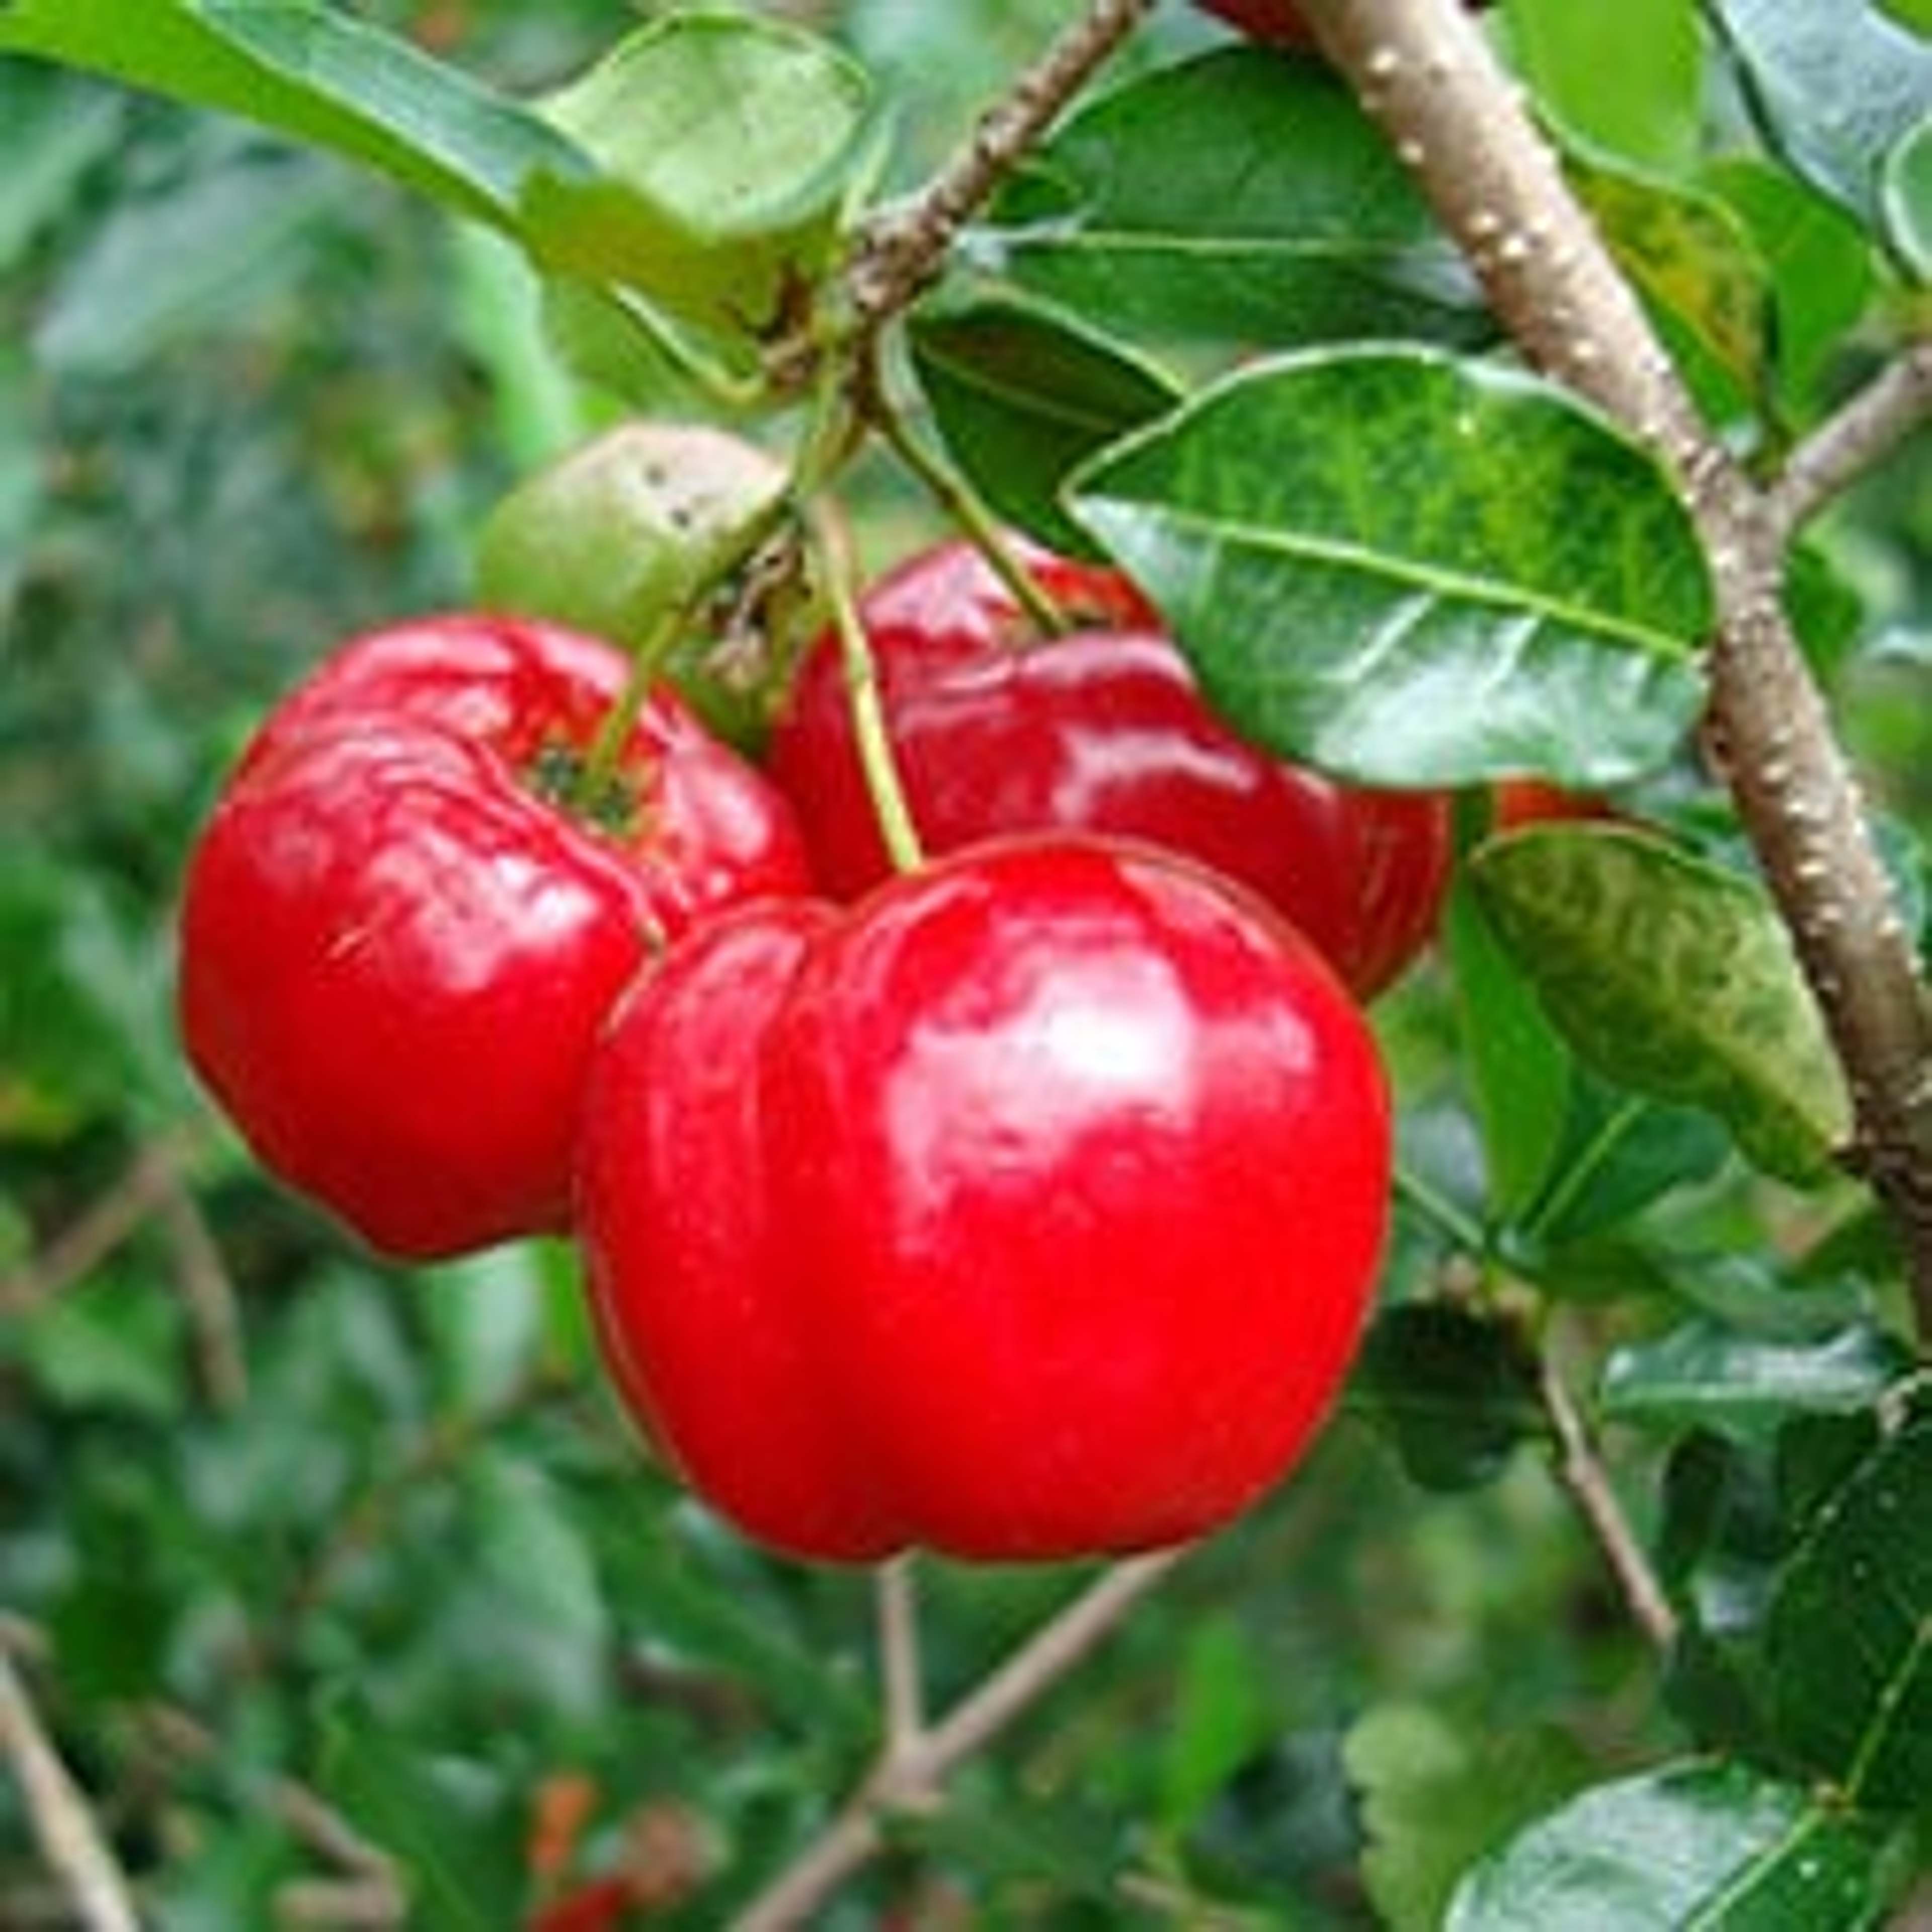 The high antioxidant properties and health-boosting effects of acerola make it a healthy alternative to orange juice.